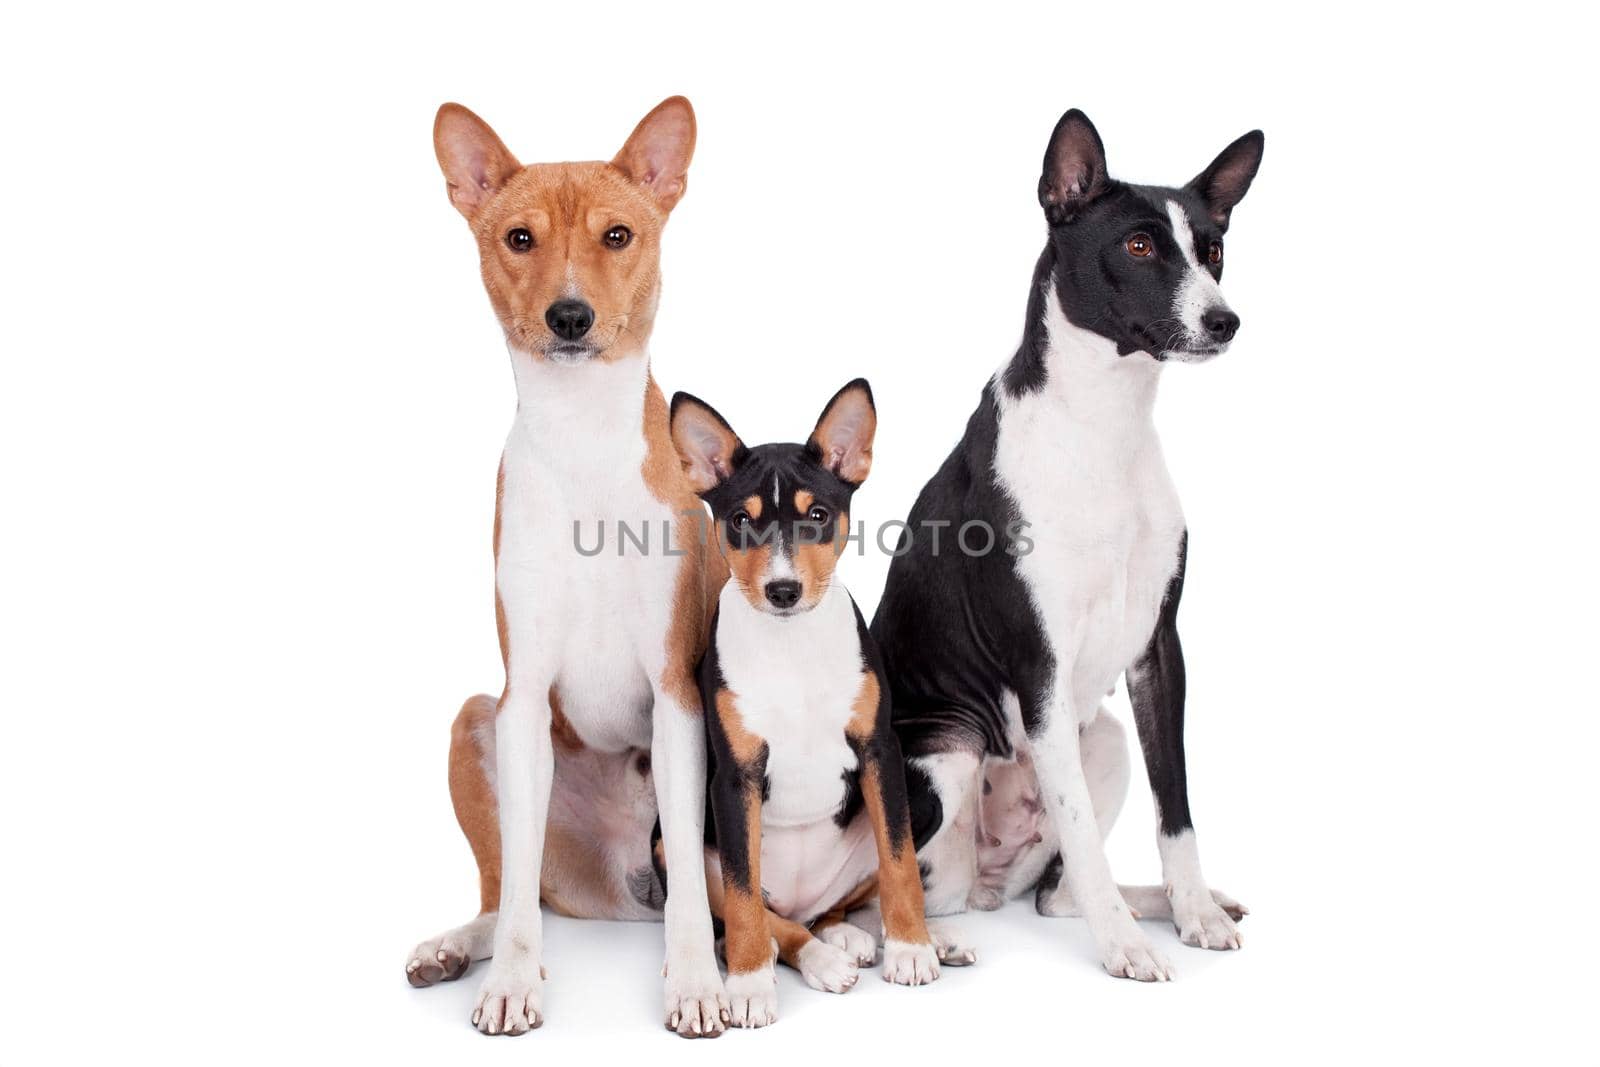 Three basenjis, tricolor, black and red color coats